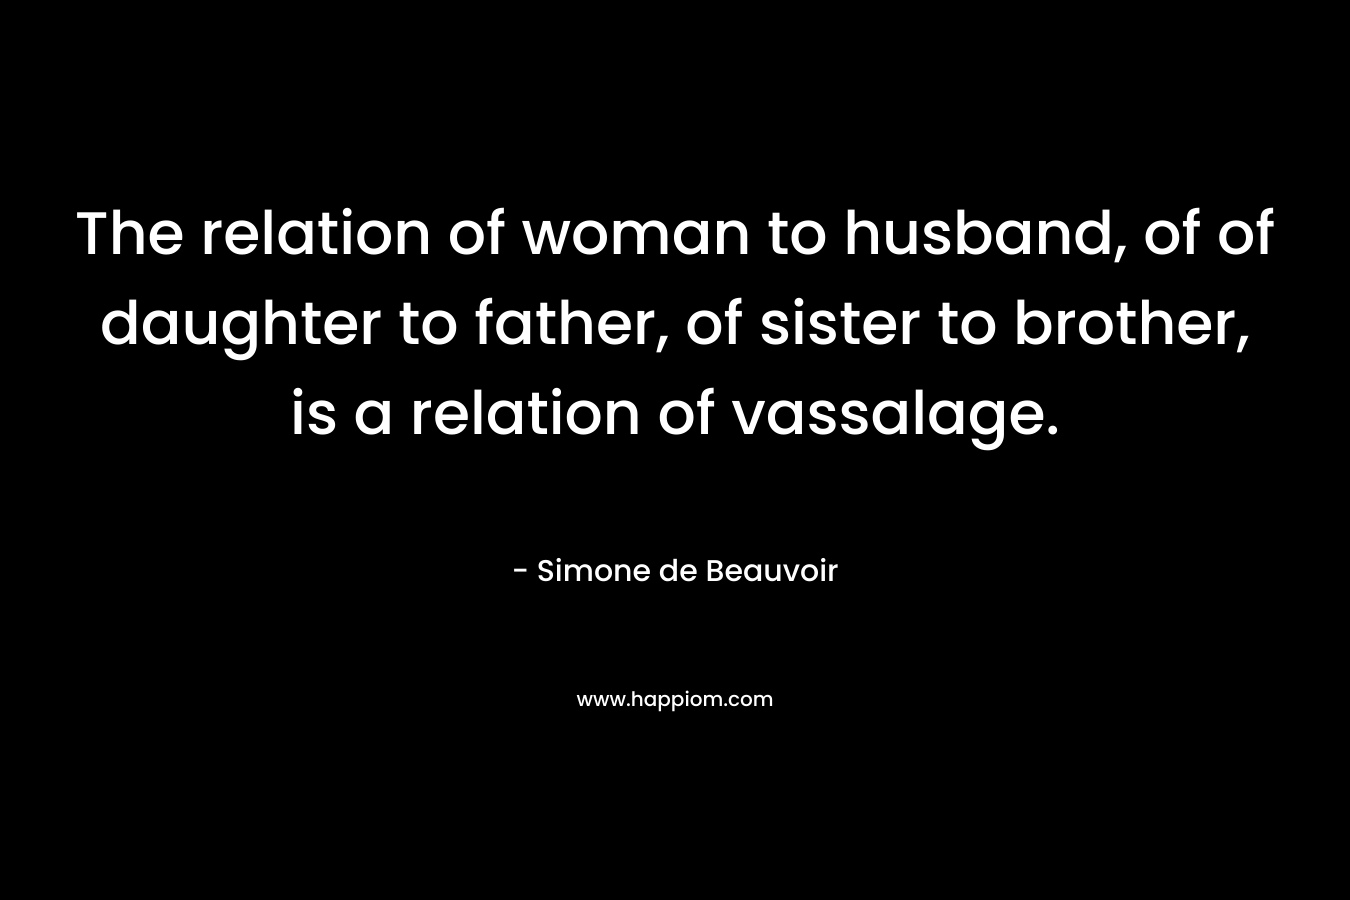 The relation of woman to husband, of of daughter to father, of sister to brother, is a relation of vassalage.